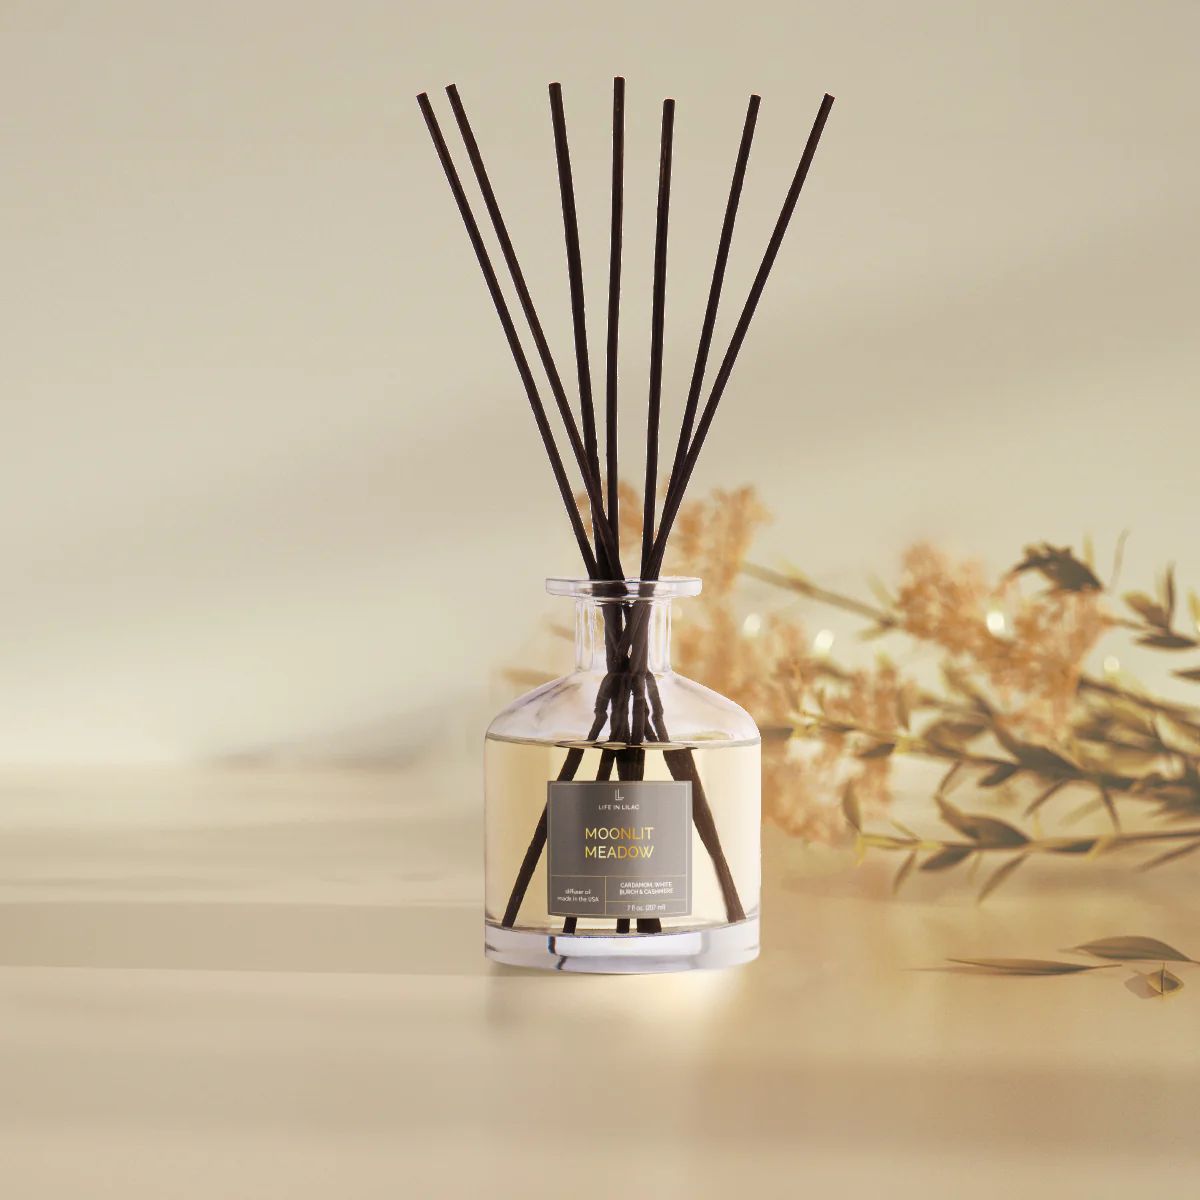 Moonlit Meadow Diffuser | Life In Lilac